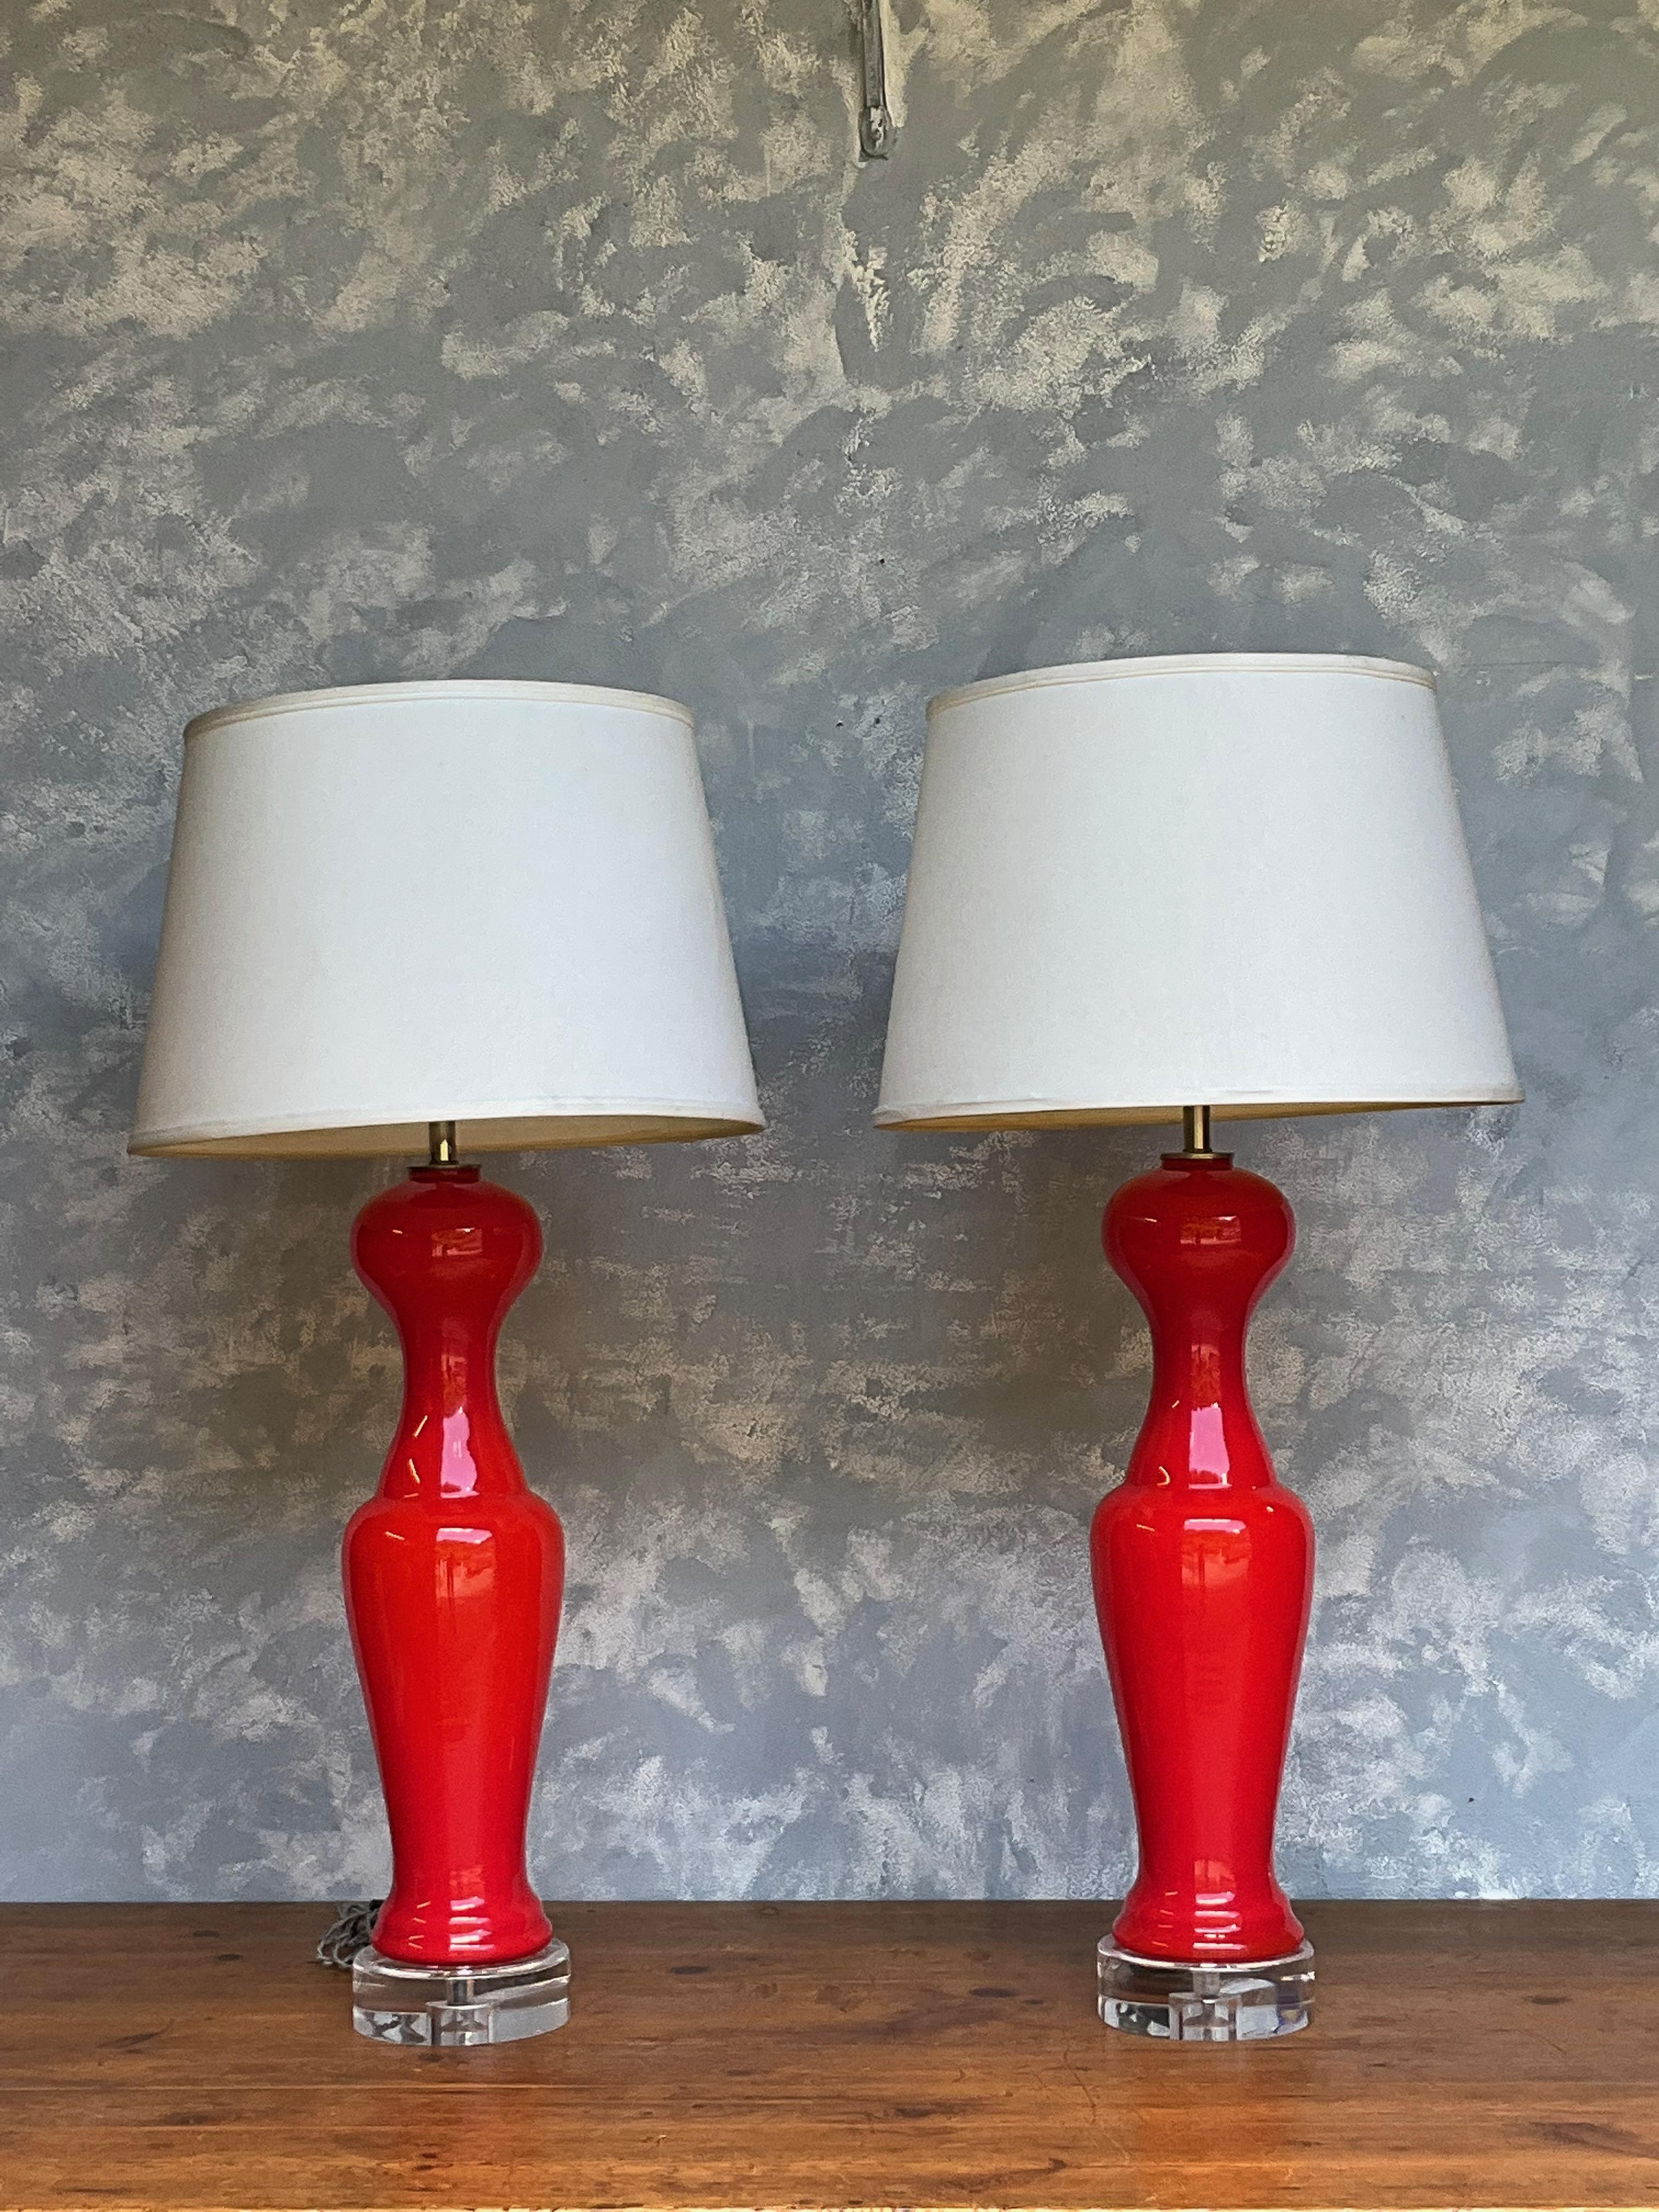 This pair of Italian 1950s pawn-shaped Murano glass lamps is a brilliant example of mid-century modern design and elegance. These stunning pieces feature a brilliant red-orange hue that adds a vibrant pop of color to any space. Resting on new